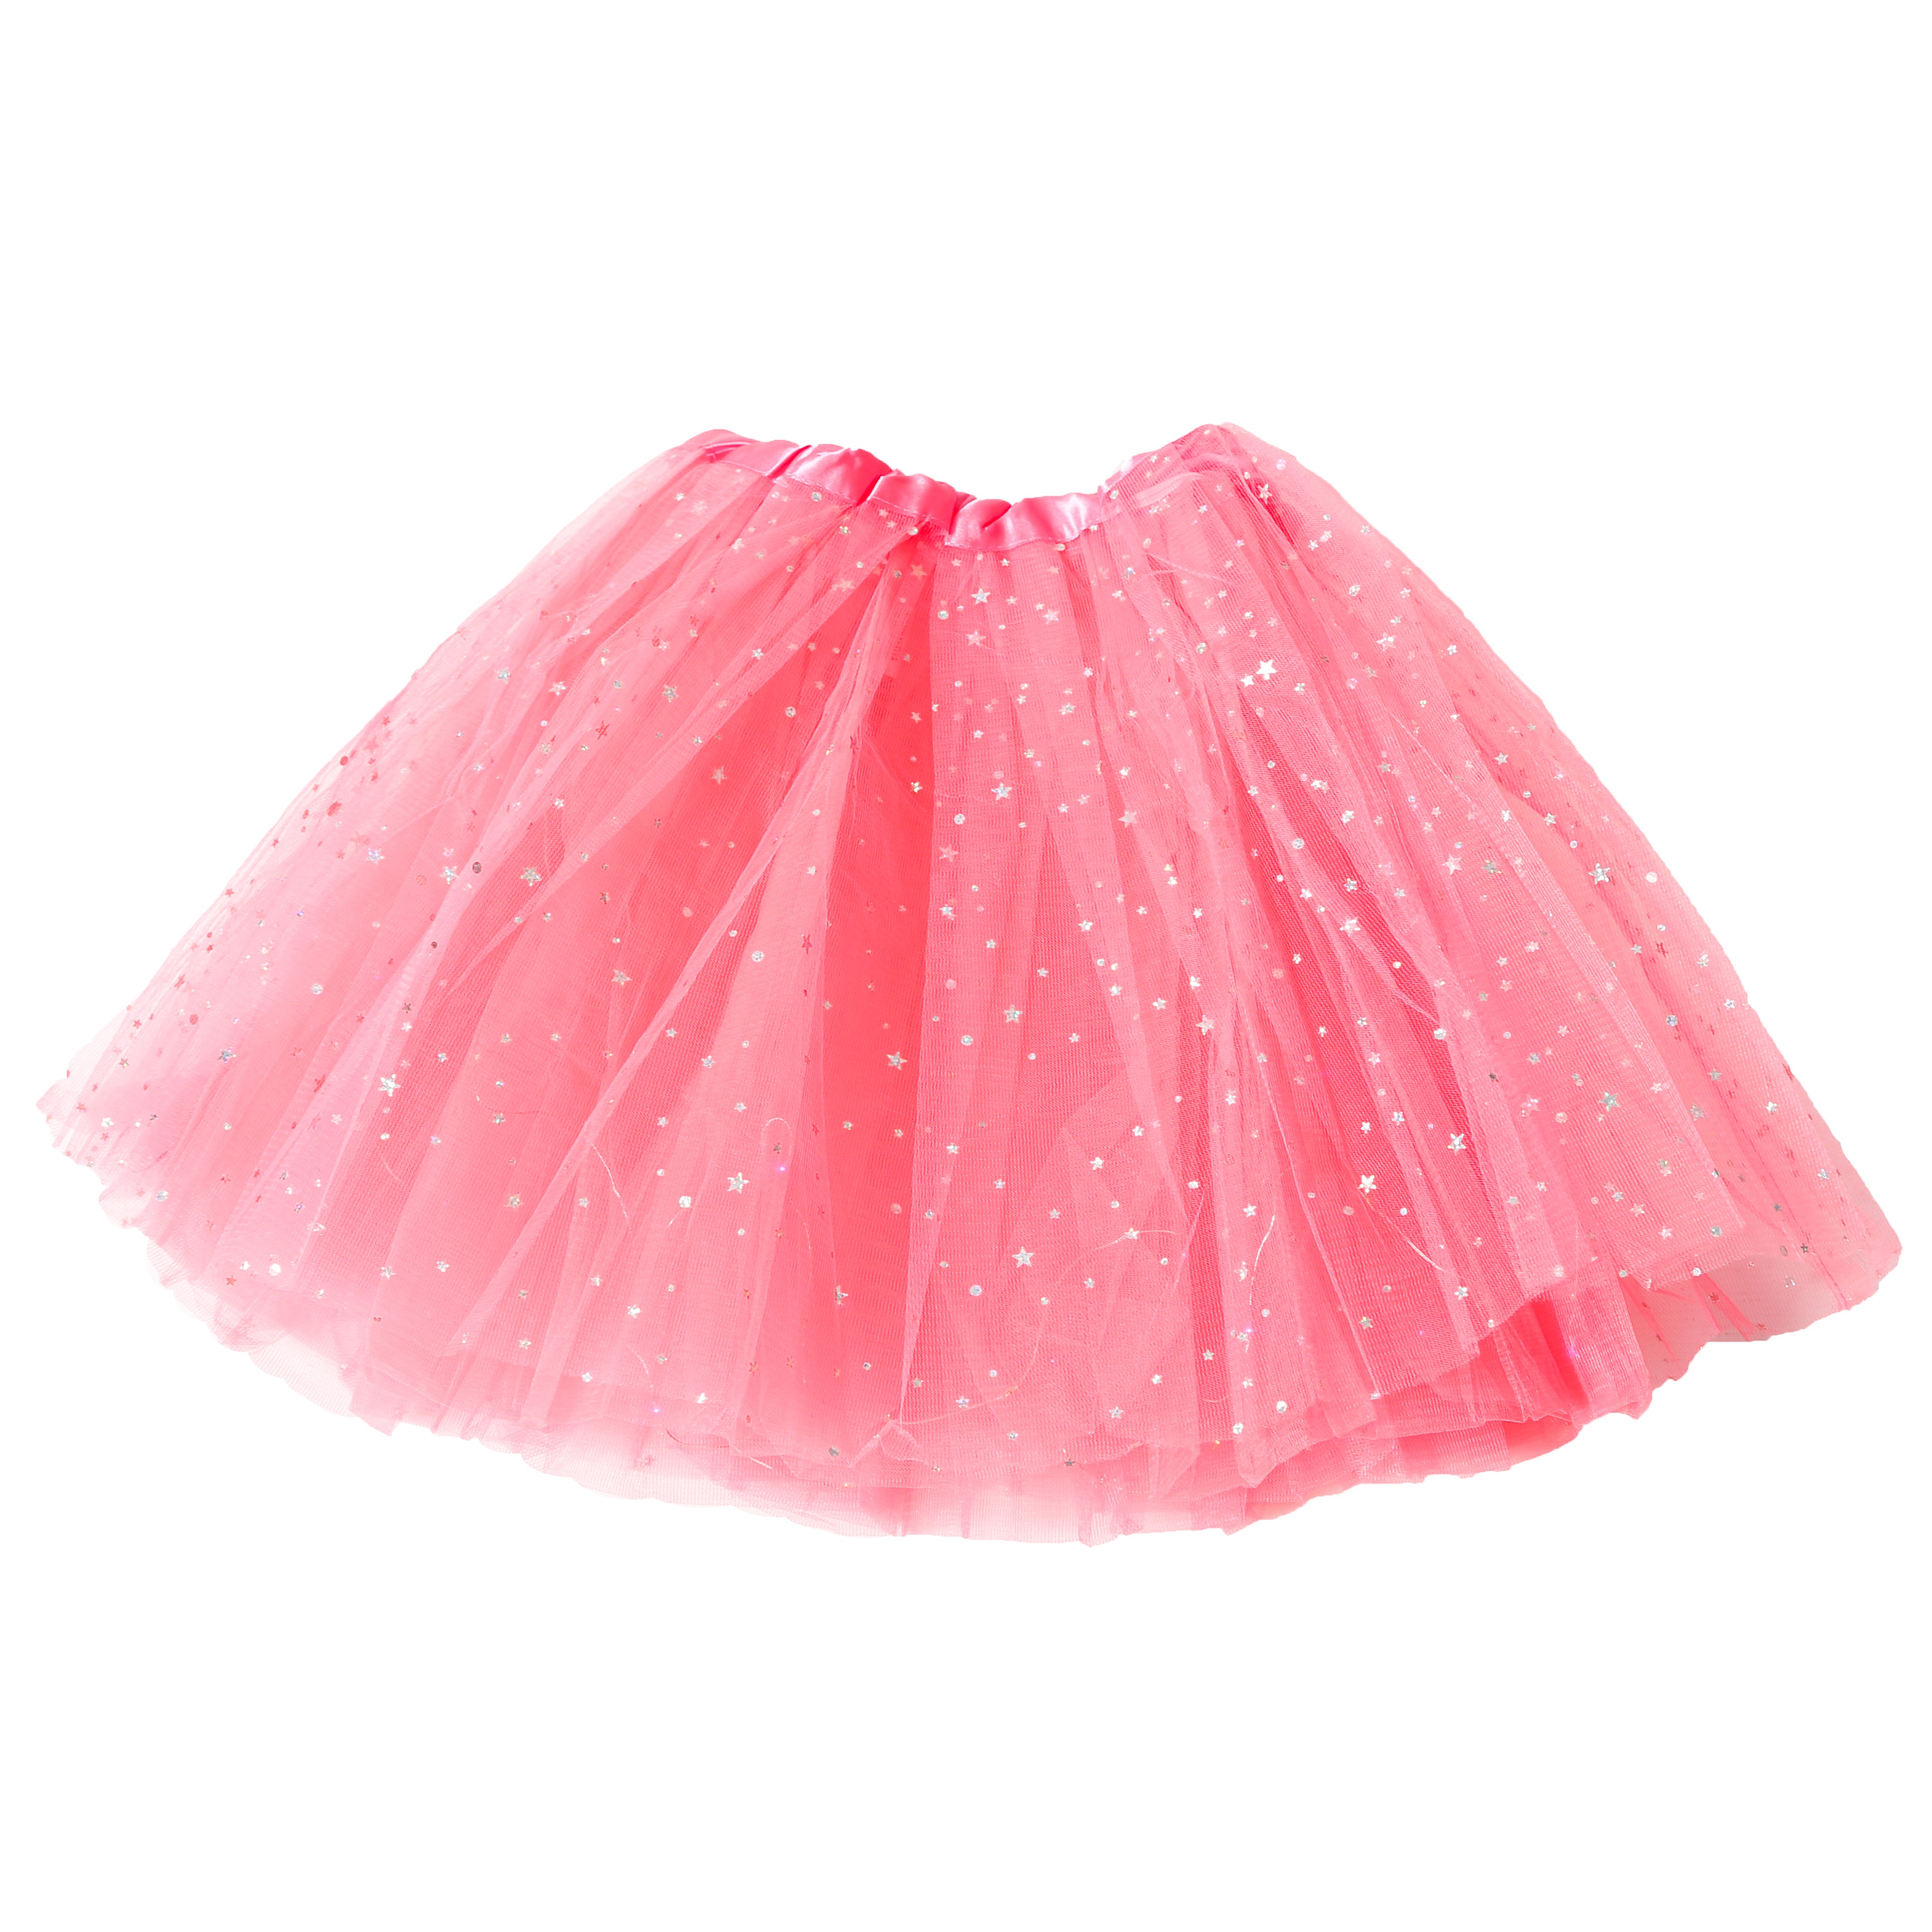 pink light up LED tutu skirt Electro Glow | South Africa's Best LED Festival Gear & Rave Clothes - festivals outfits, clothes festival, festival clothing south africa, festival ideas outfits, festival outfits rave, festival wear, steam punk goggle, rave glasses, outfit for a rave, kaleidoscope glasses, diffraction glasses, clothes for a rave, rave sunglasses, spectral glasses, rave goggles, clothes for a rave, rave clothing south africa, festival wear south africa, accessories festival, rave sunglasses